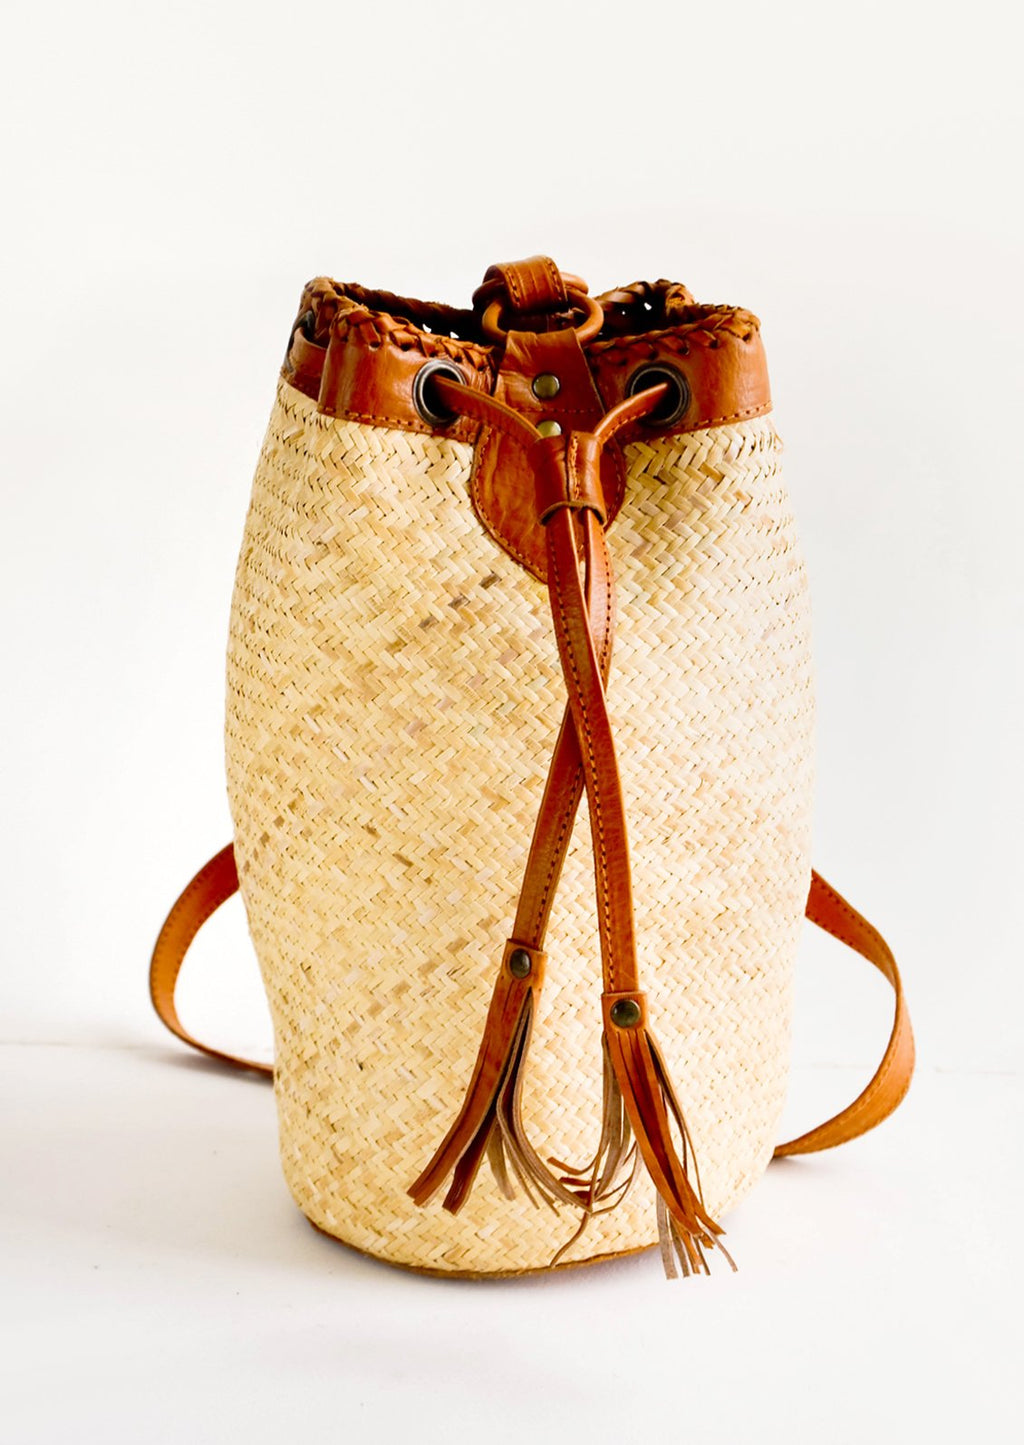 1: Tall and round woven straw bag with tanned leather details